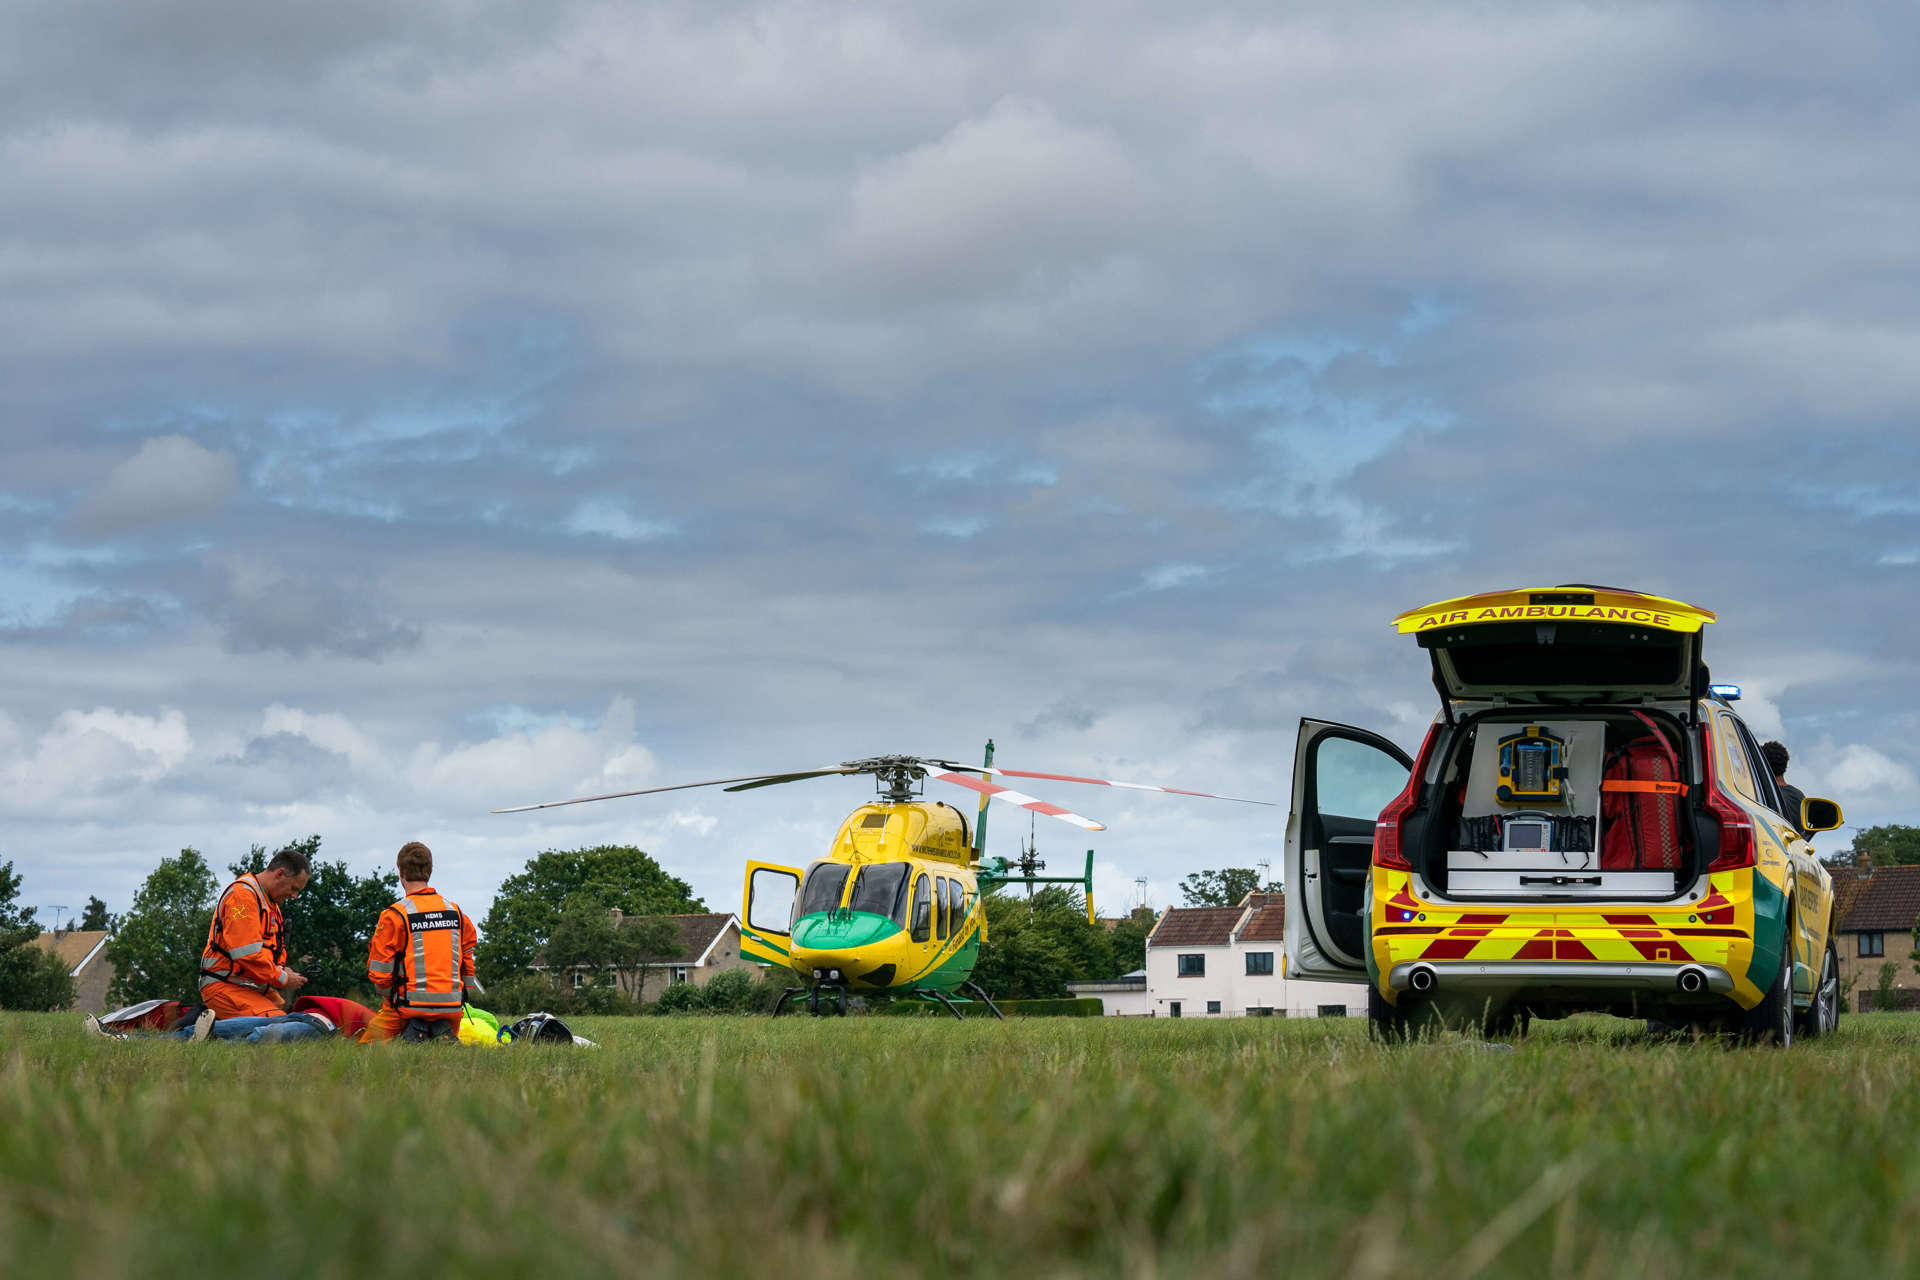 Two paramedics performing a staged incident in a field, with the Wiltshire Air Ambulance yellow and green helicopter and critical care car